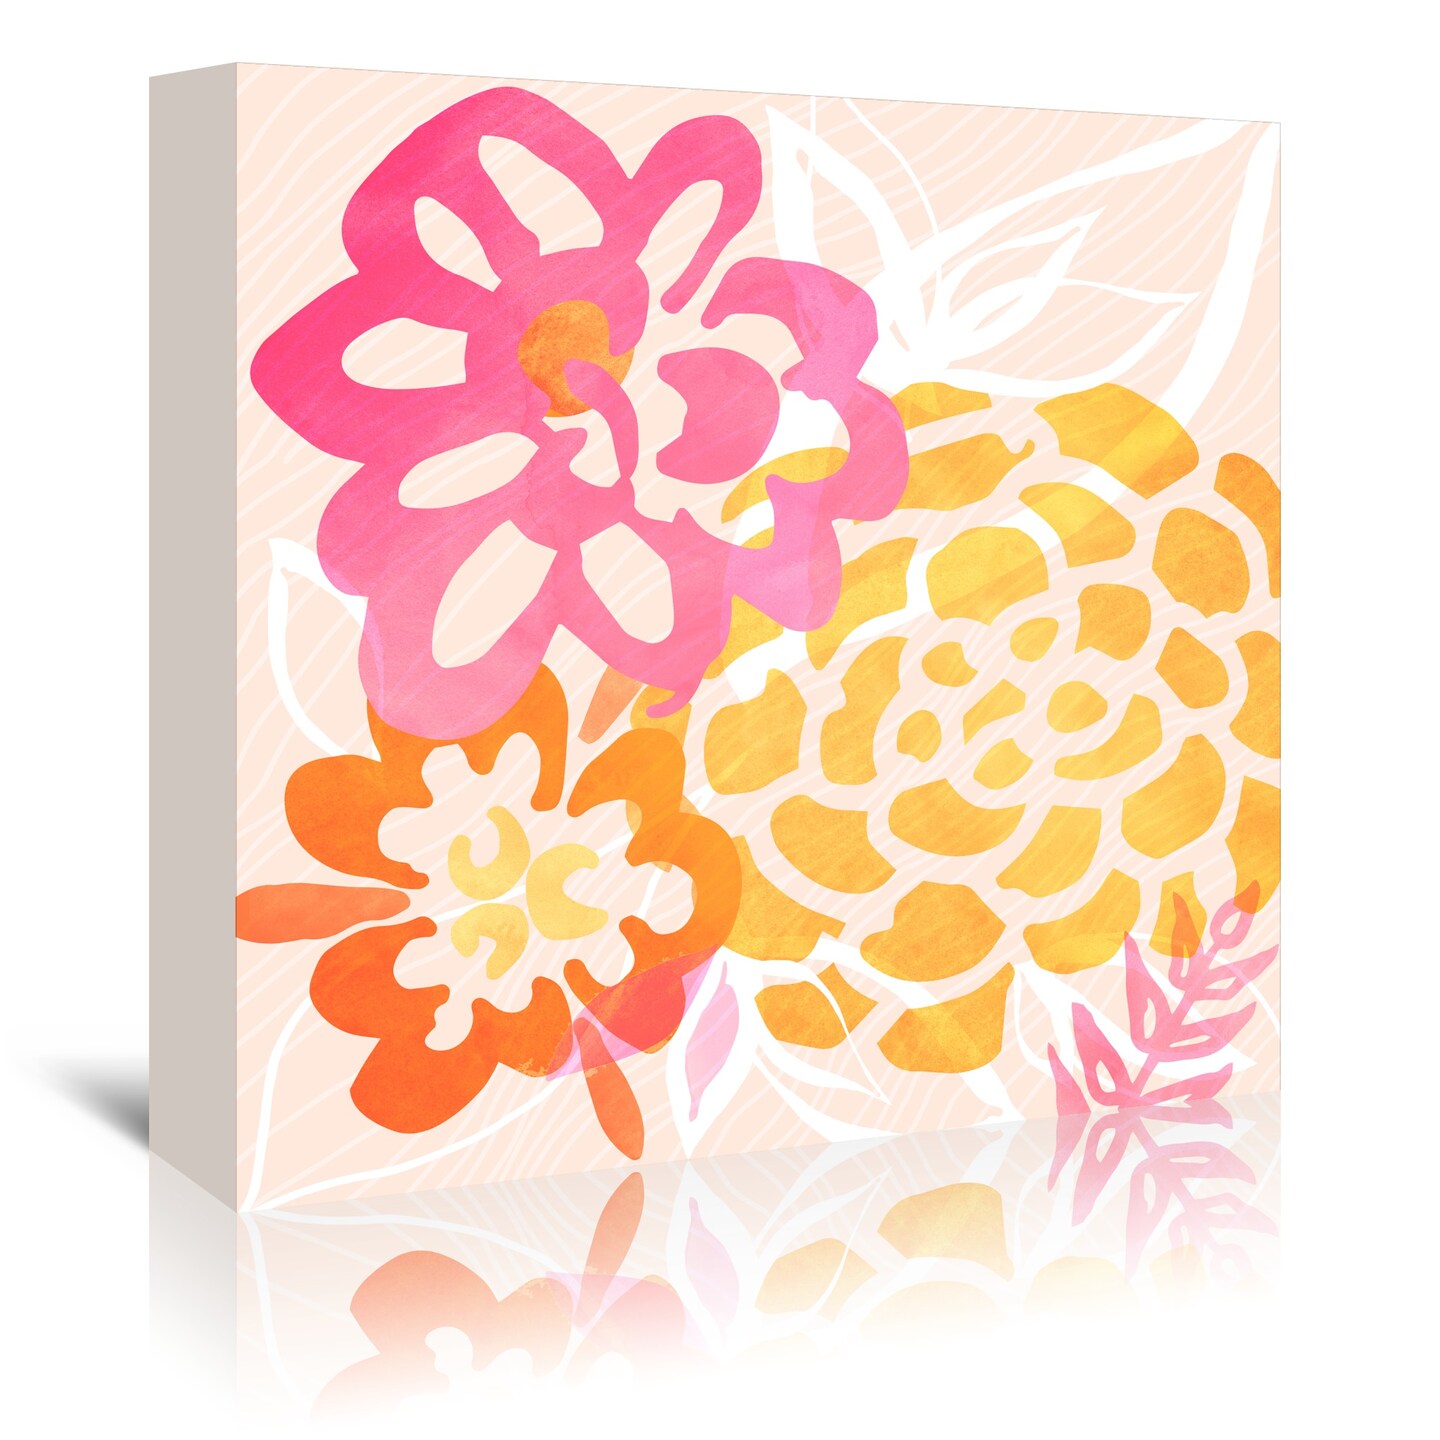 Coral Blossoms By Modern Tropical - 3 Piece Canvas Set